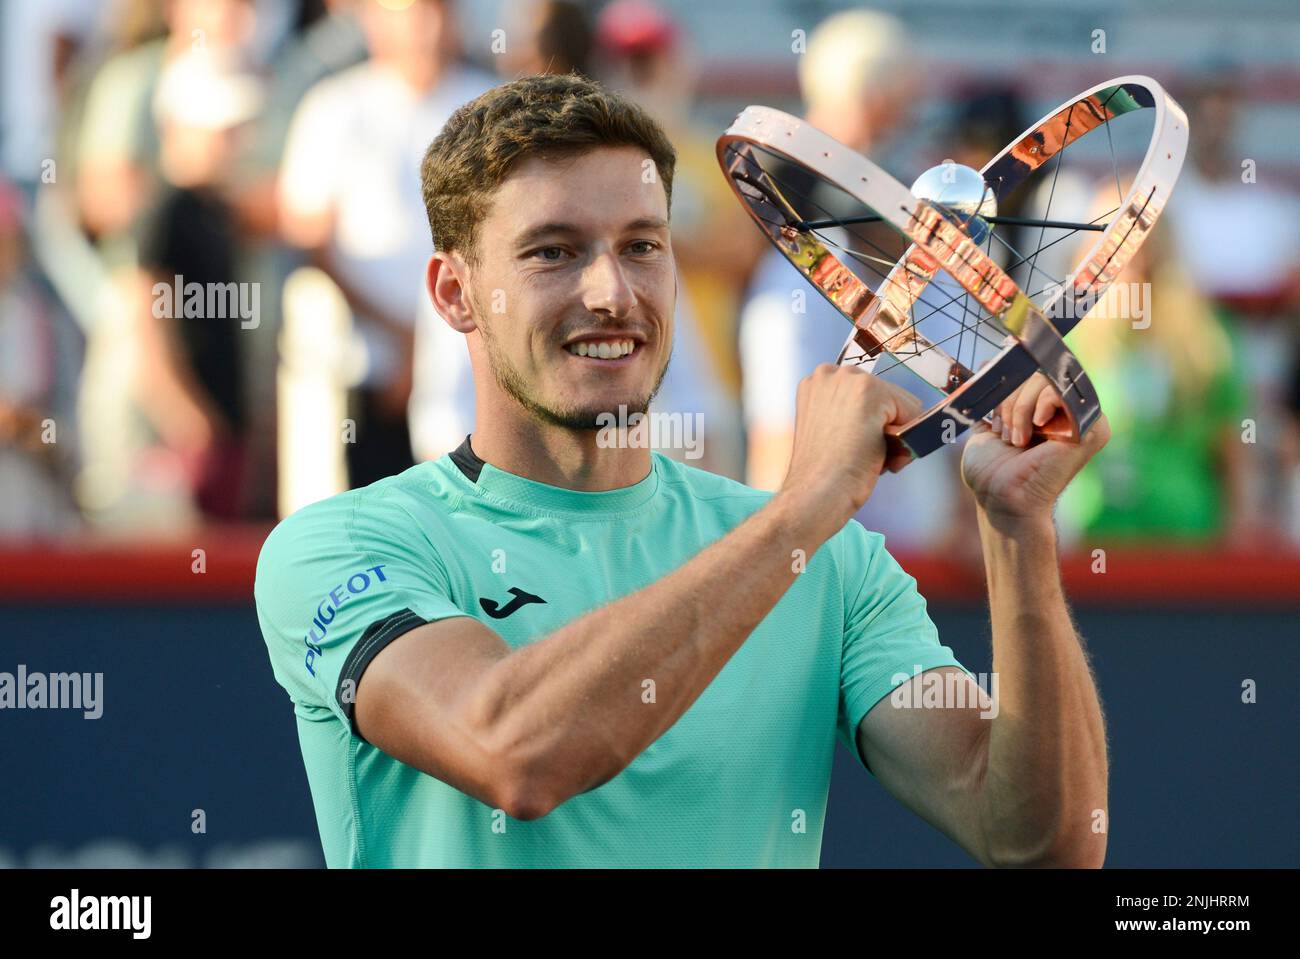 August 14, 2022, Montreal, Quebec, Canada PABLO CARRENO BUSTA of Spain poses with the trophy after winning the National Bank Open tennis tournament in Montreal Canada